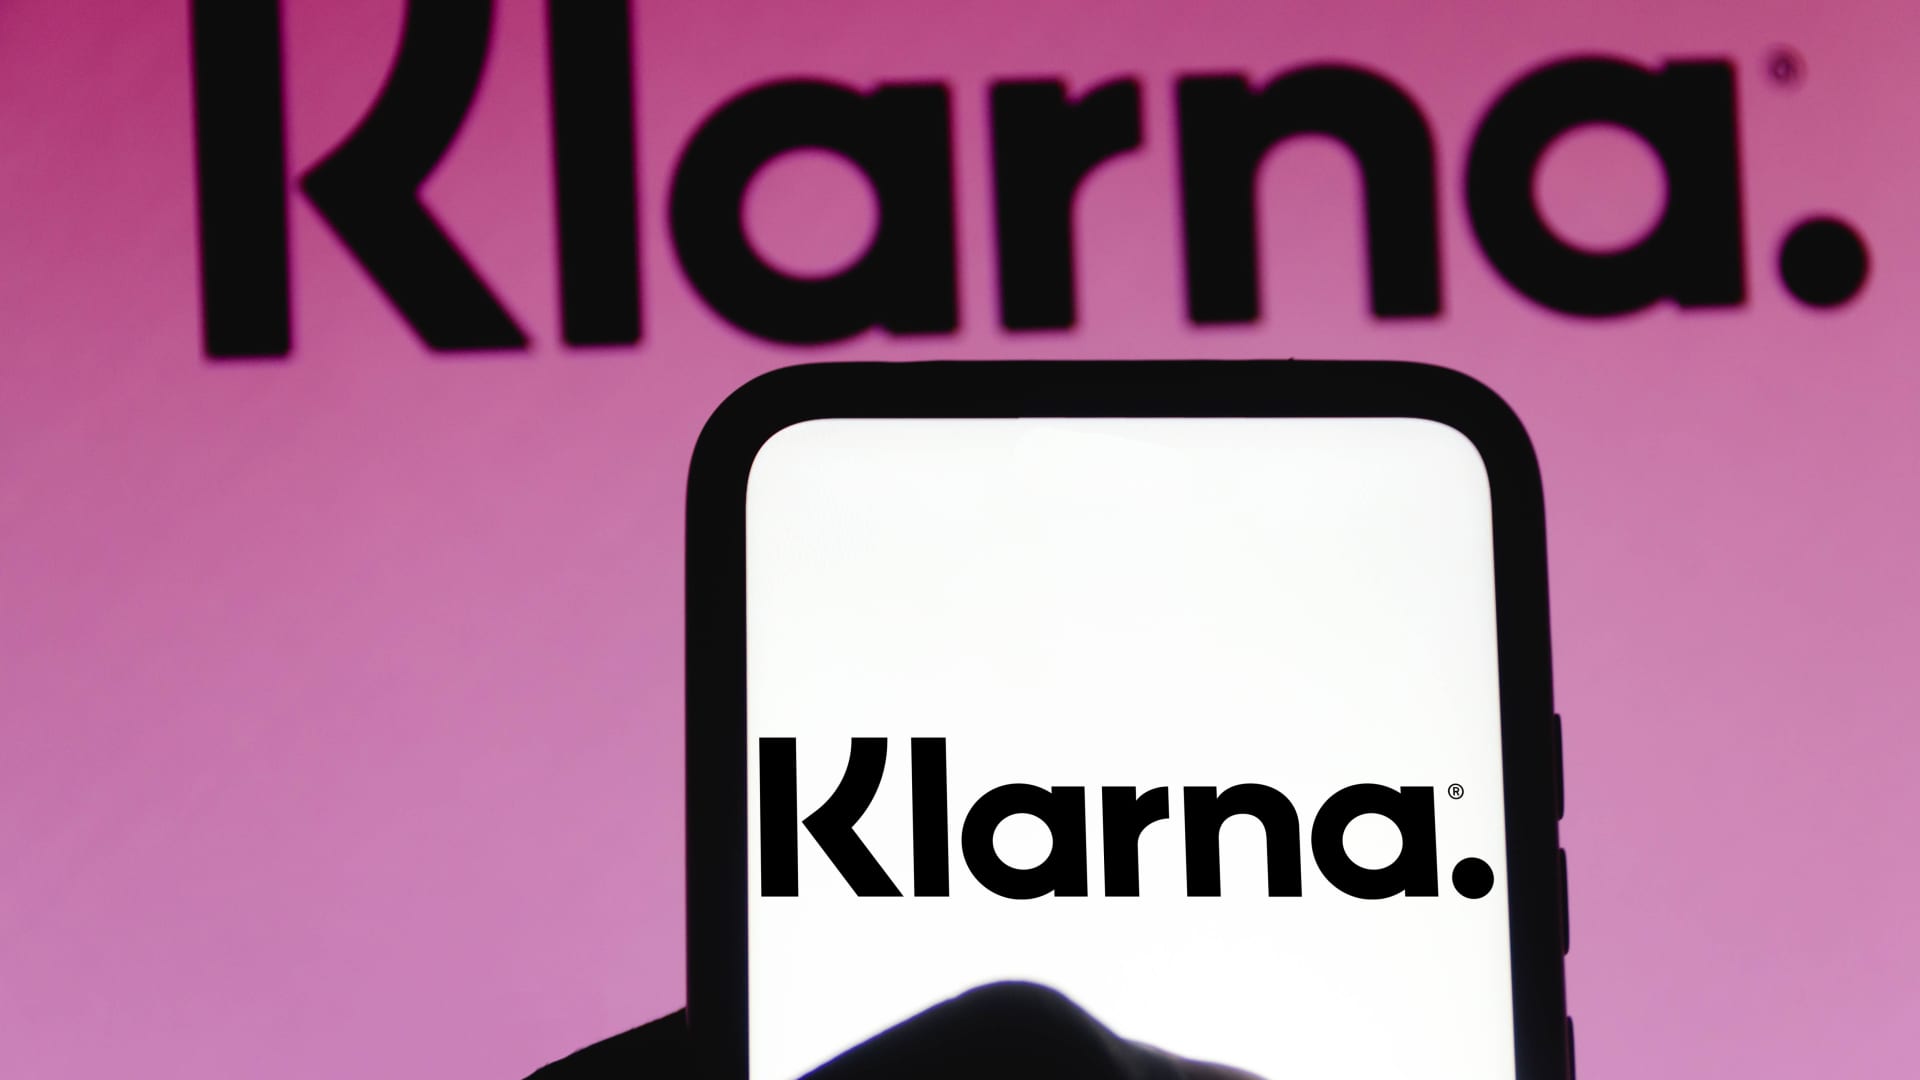 Klarna says 90% of its employees are using generative AI daily